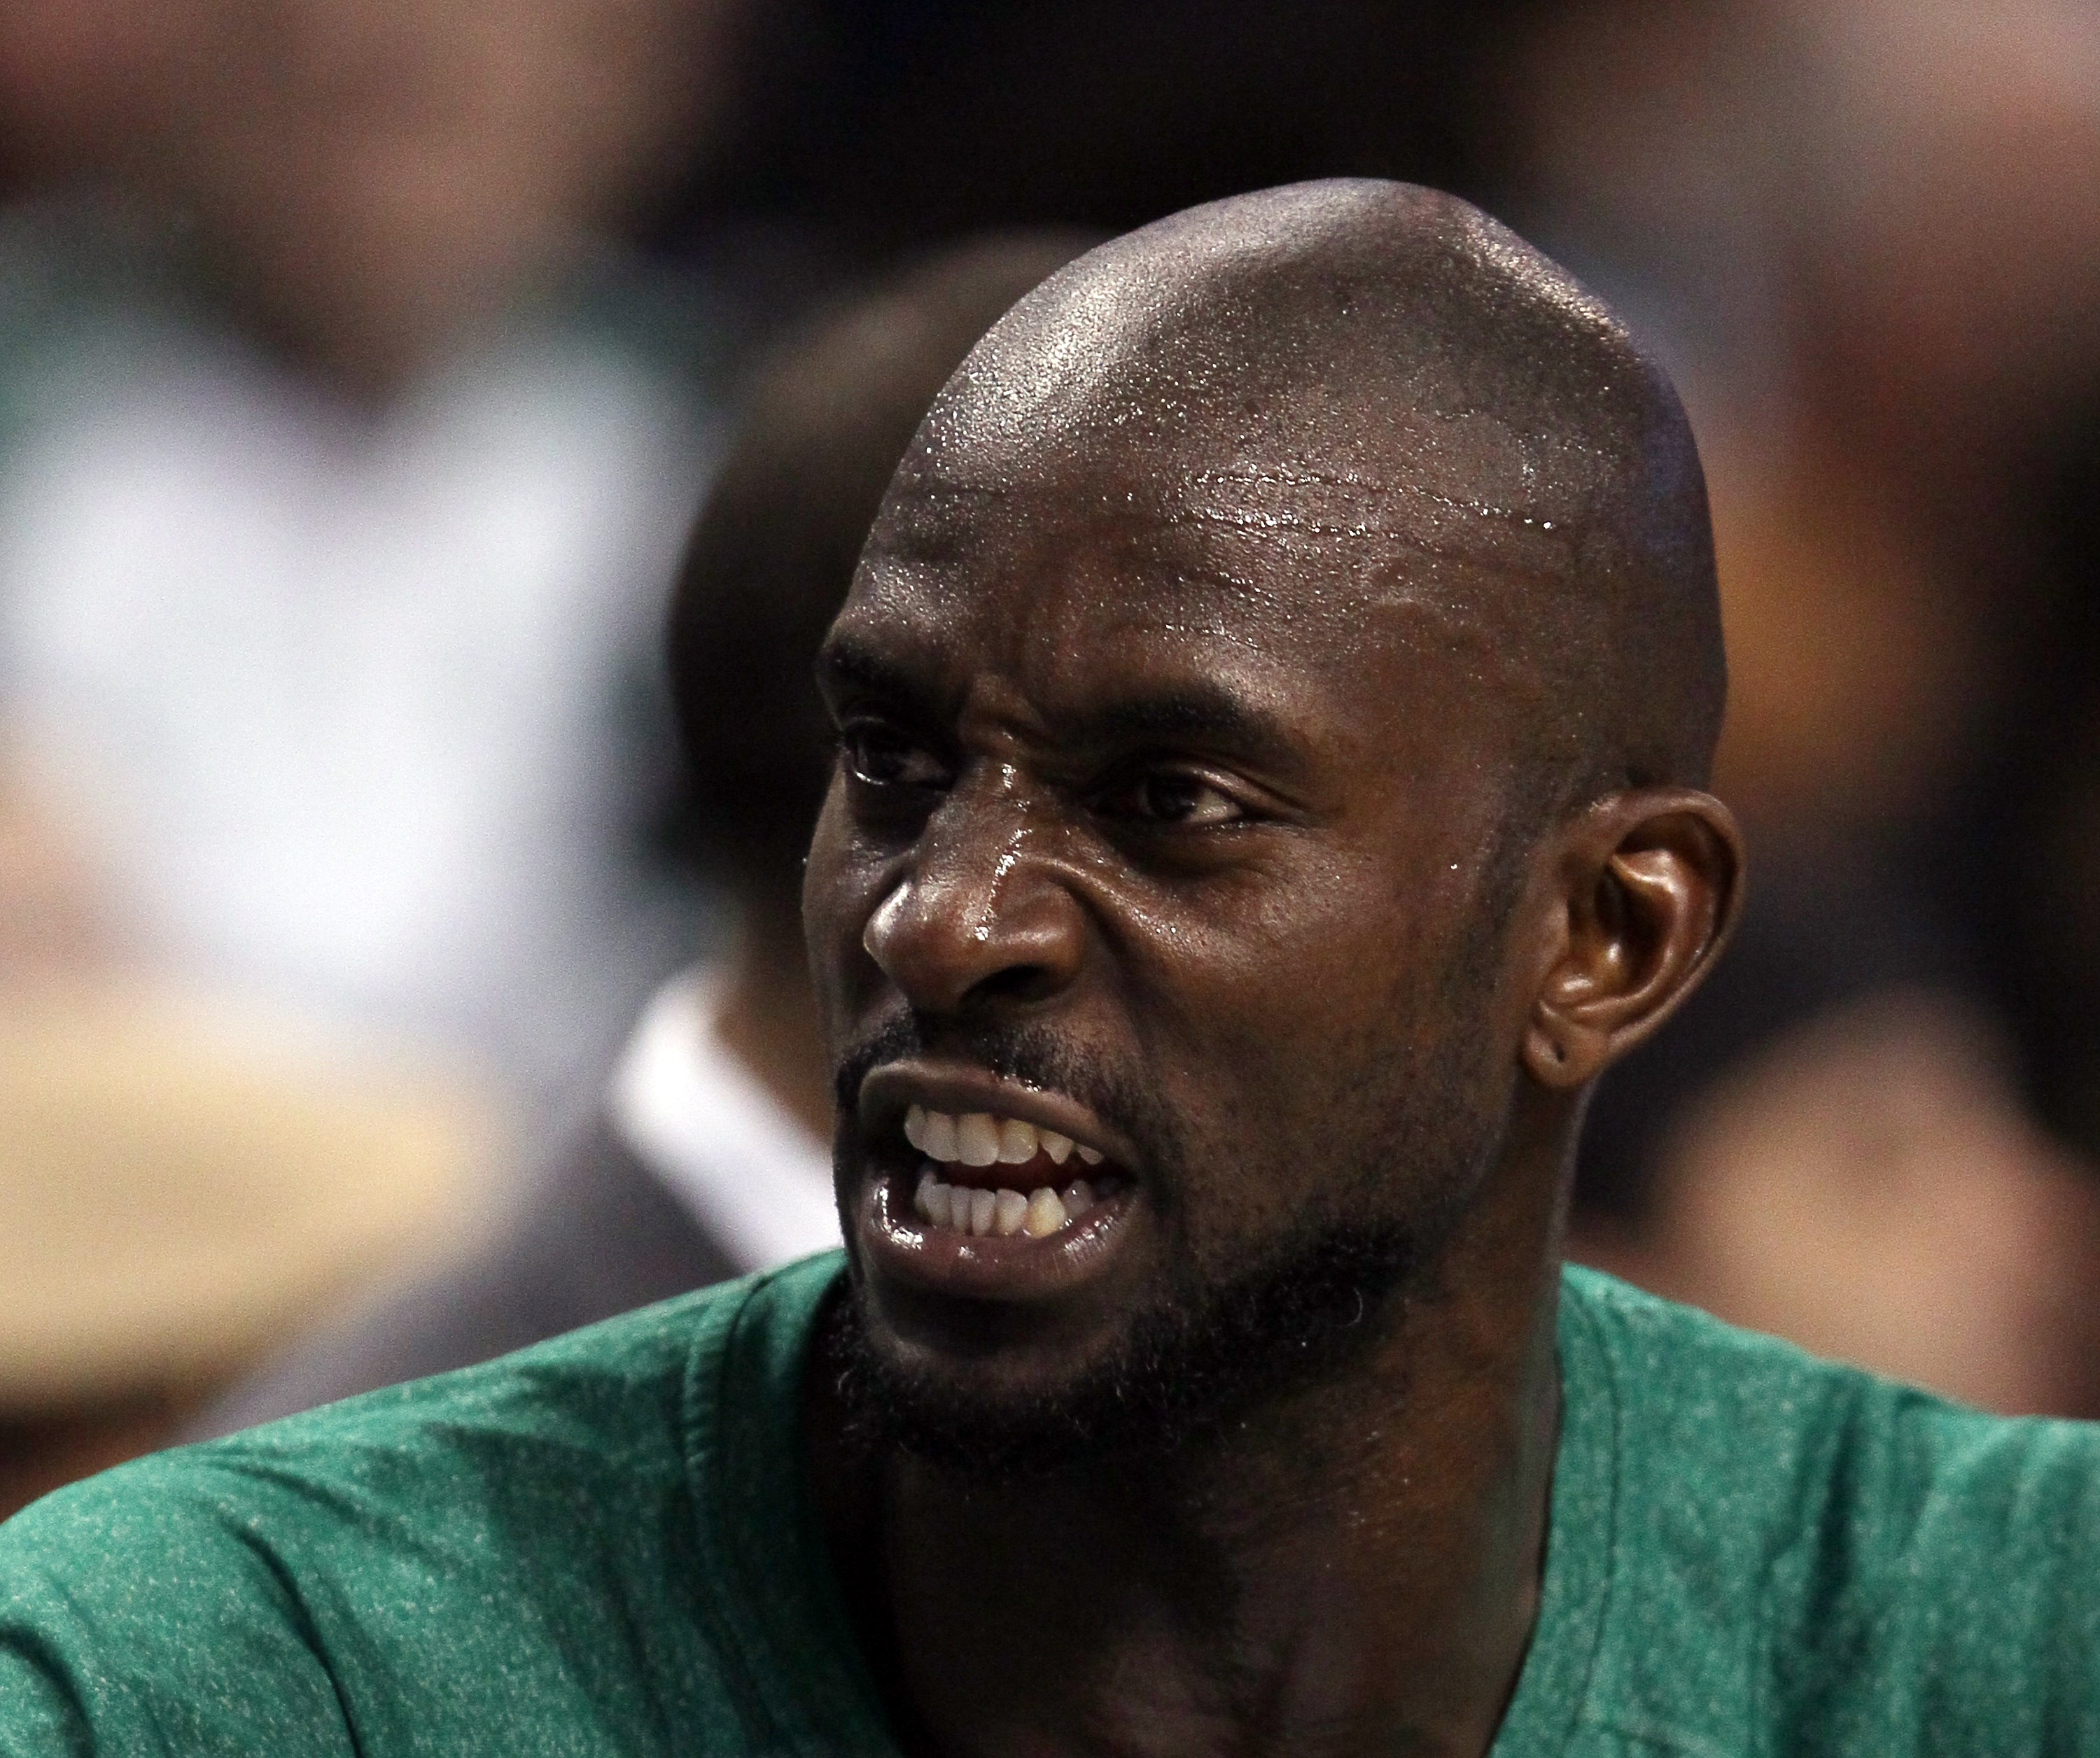 BOSTON, MA - DECEMBER 16:  Kevin Garnett #5 of the Boston Celtics talks on the bench in the first half against the Atlanta Hawks on December 16, 2010 at the TD Garden in Boston, Massachusetts. NOTE TO USER: User expressly acknowledges and agrees that, by